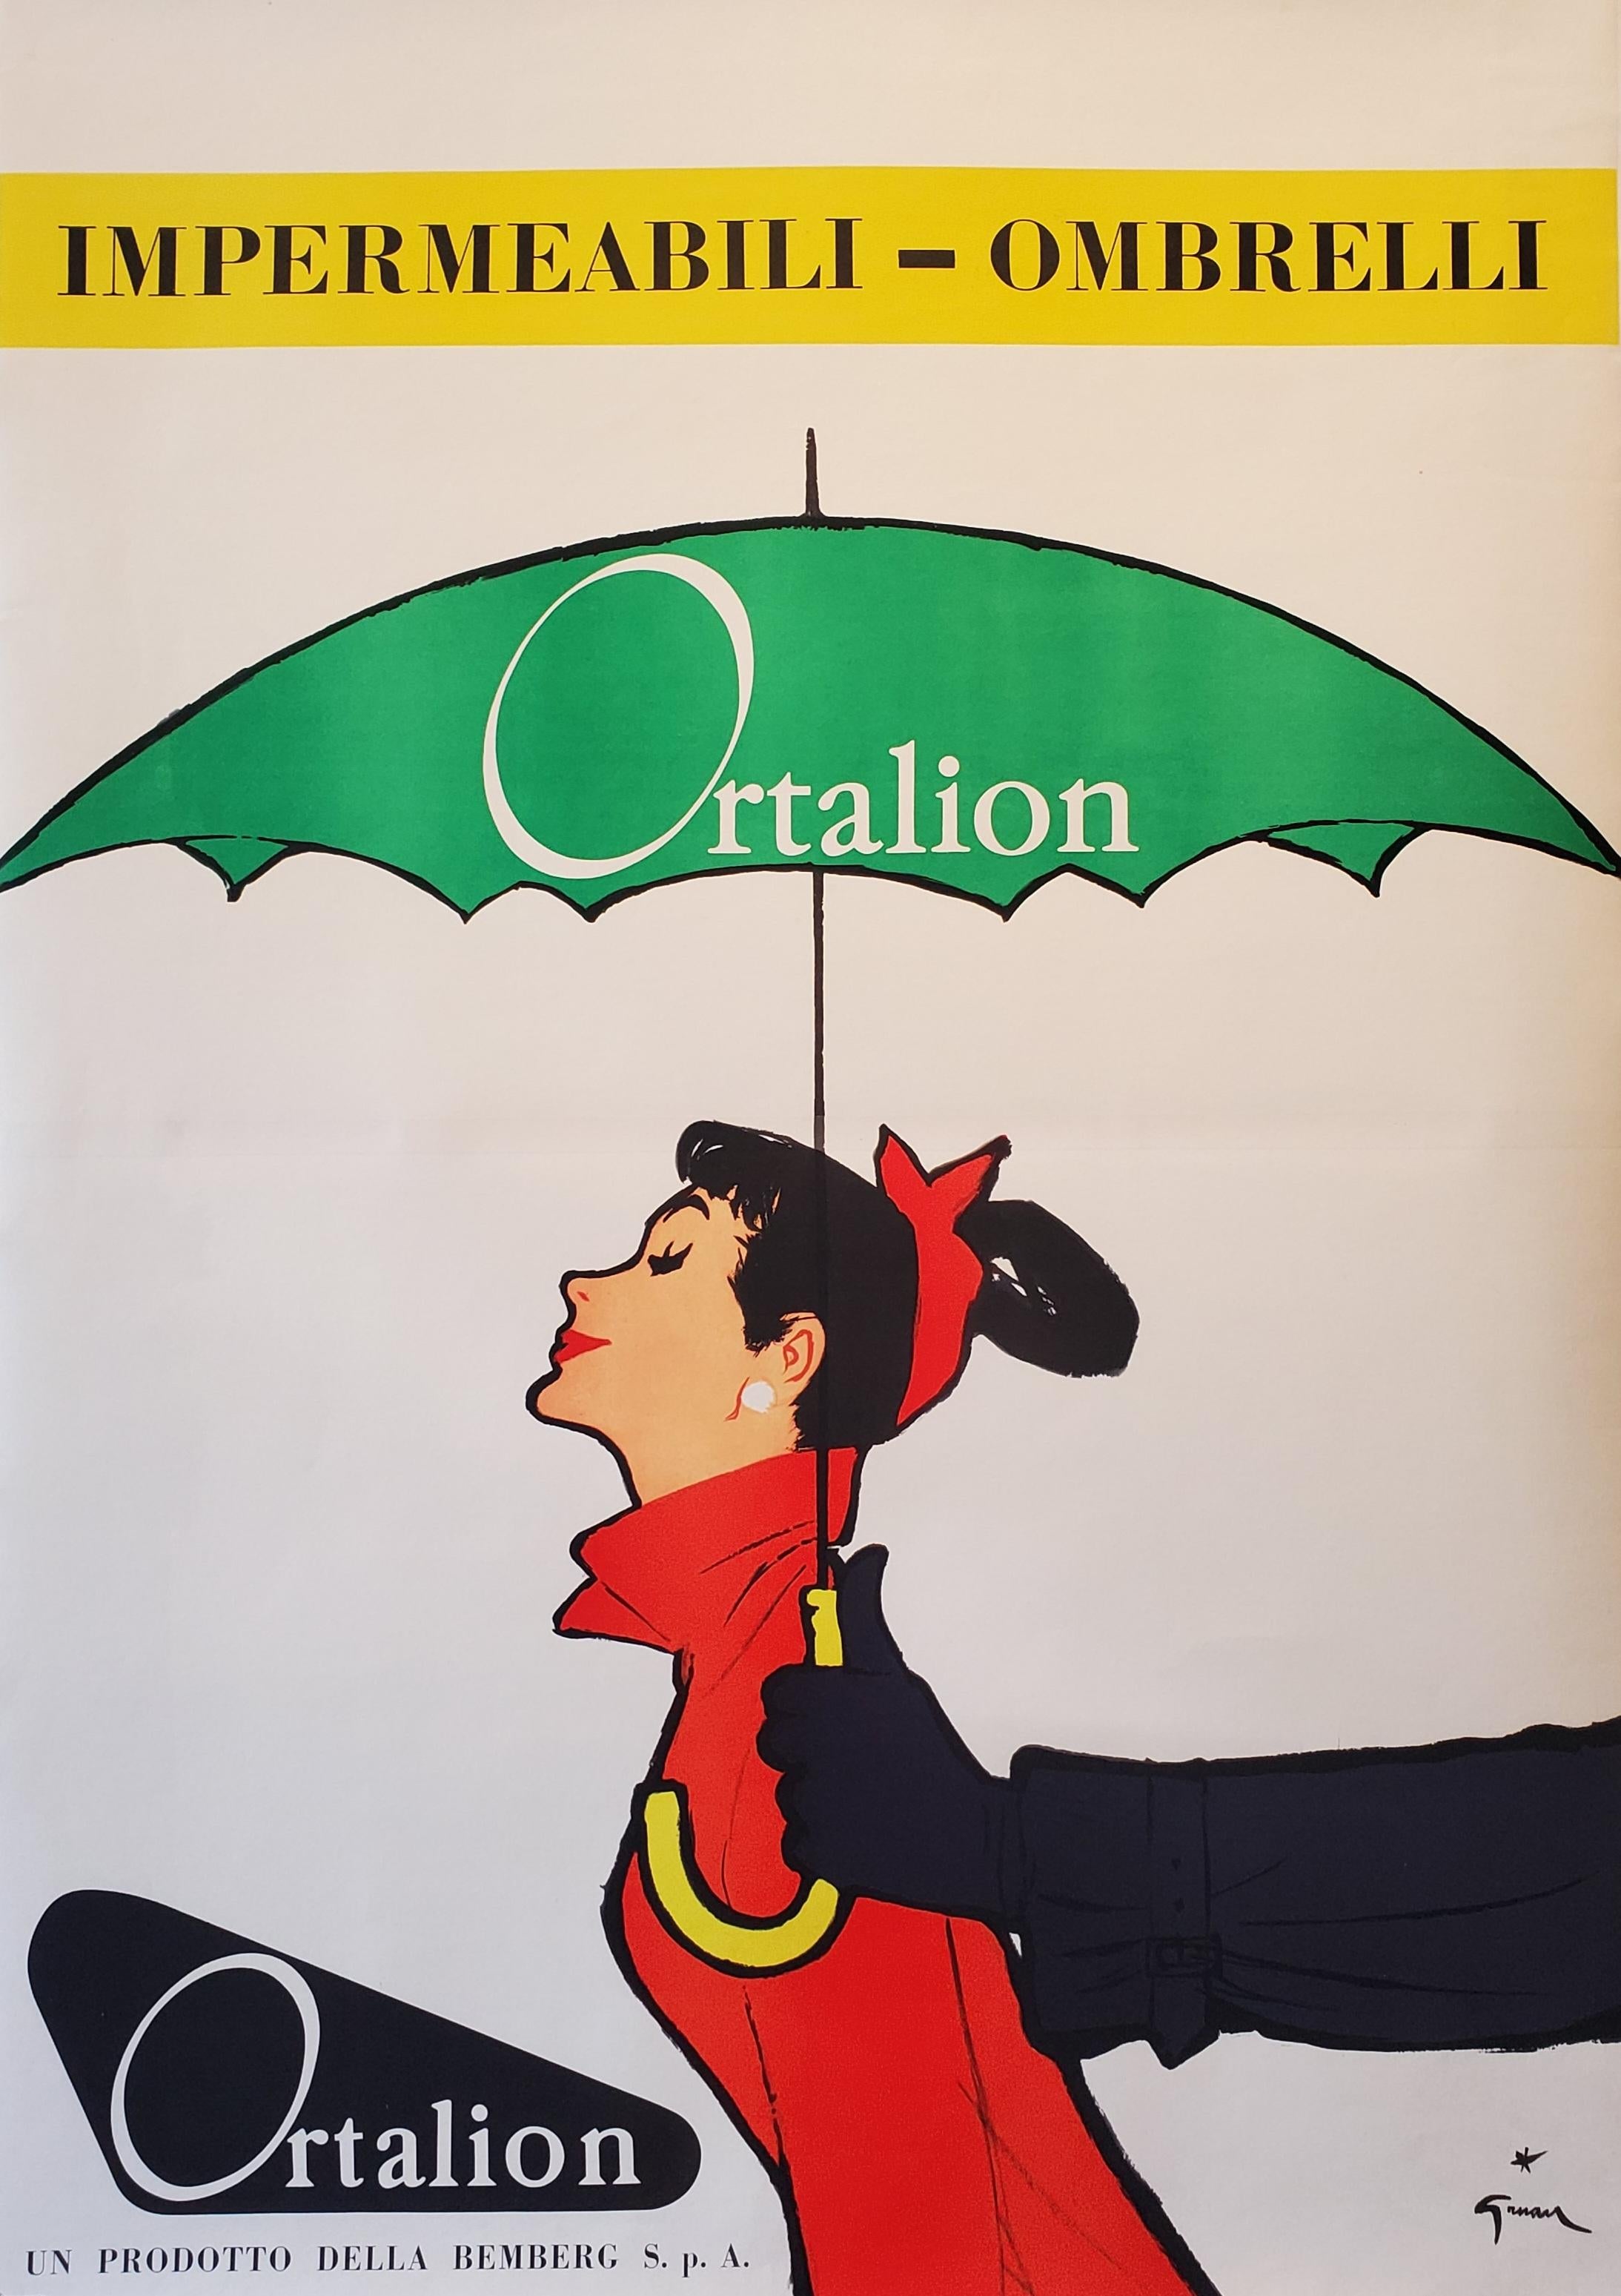 Original French Poster, 'Ortalion Ombrelli Audrey Hepburn' 1968

This is an original poster from 1968, with the artists muse, Audrey Hepburn. This poster is an oversized poster which has been linen backed for preservation. The poster itself has